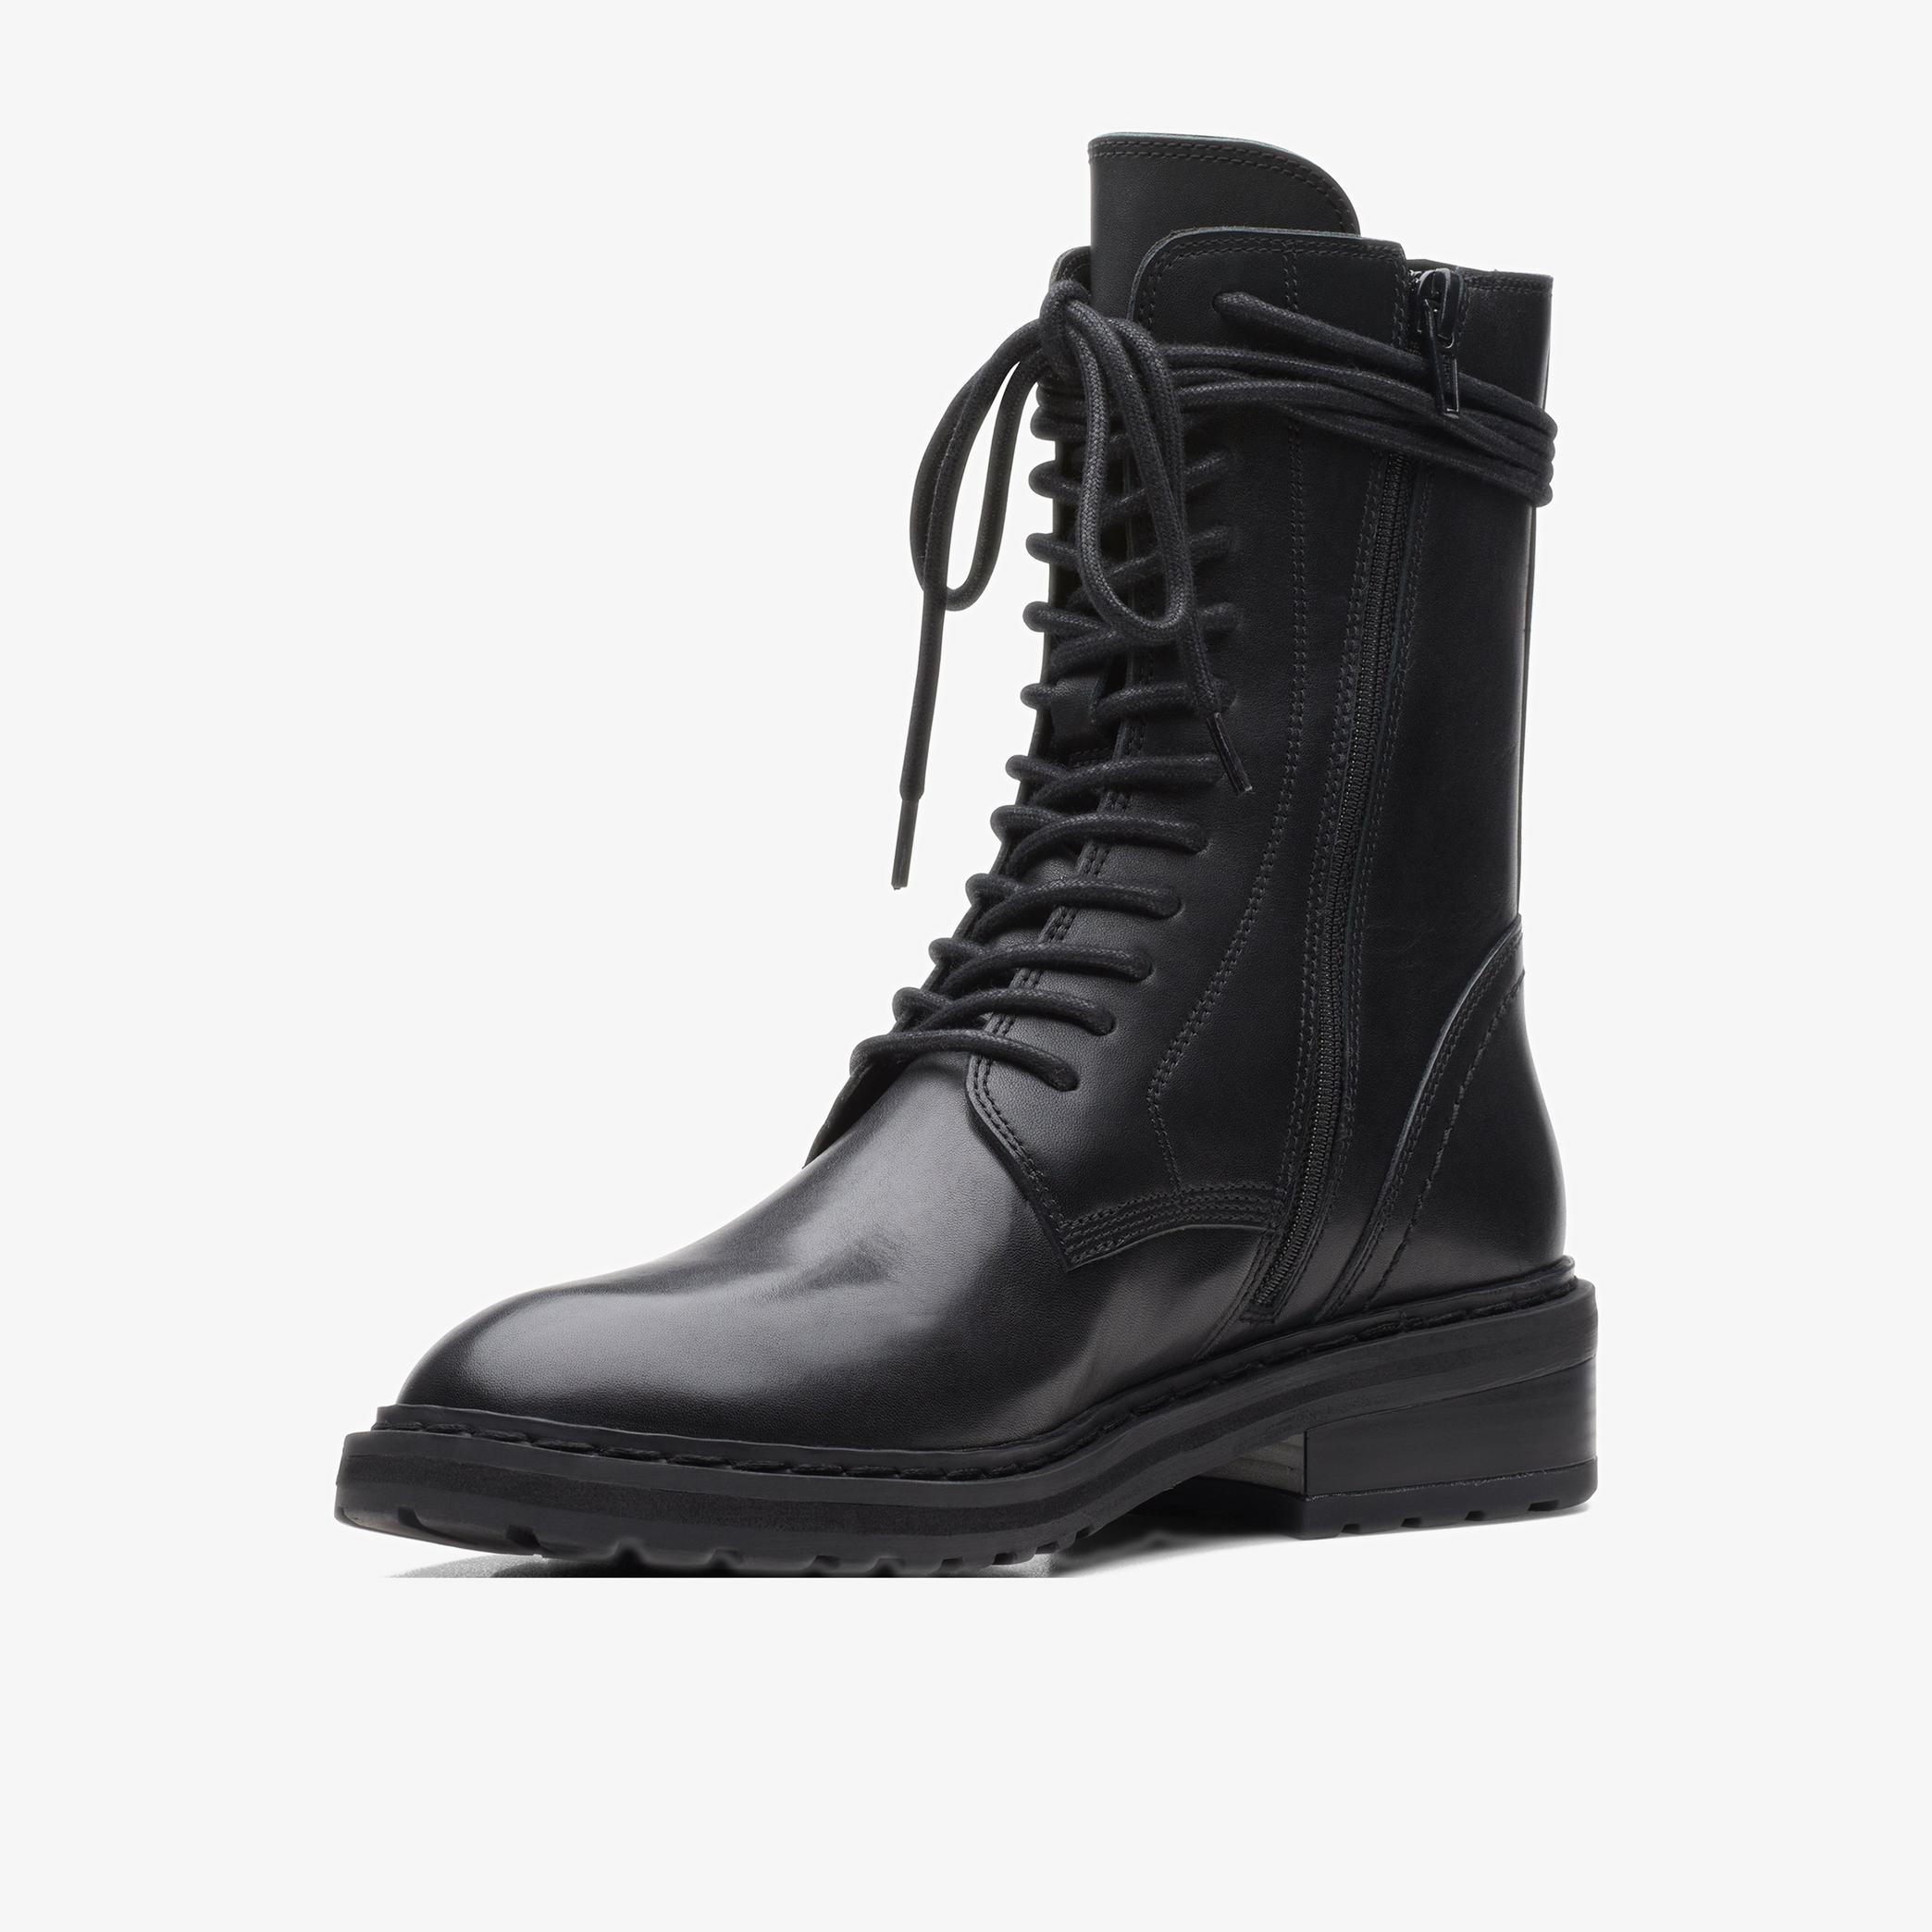 Tilham Lace Black Leather Ankle Boots, view 4 of 6